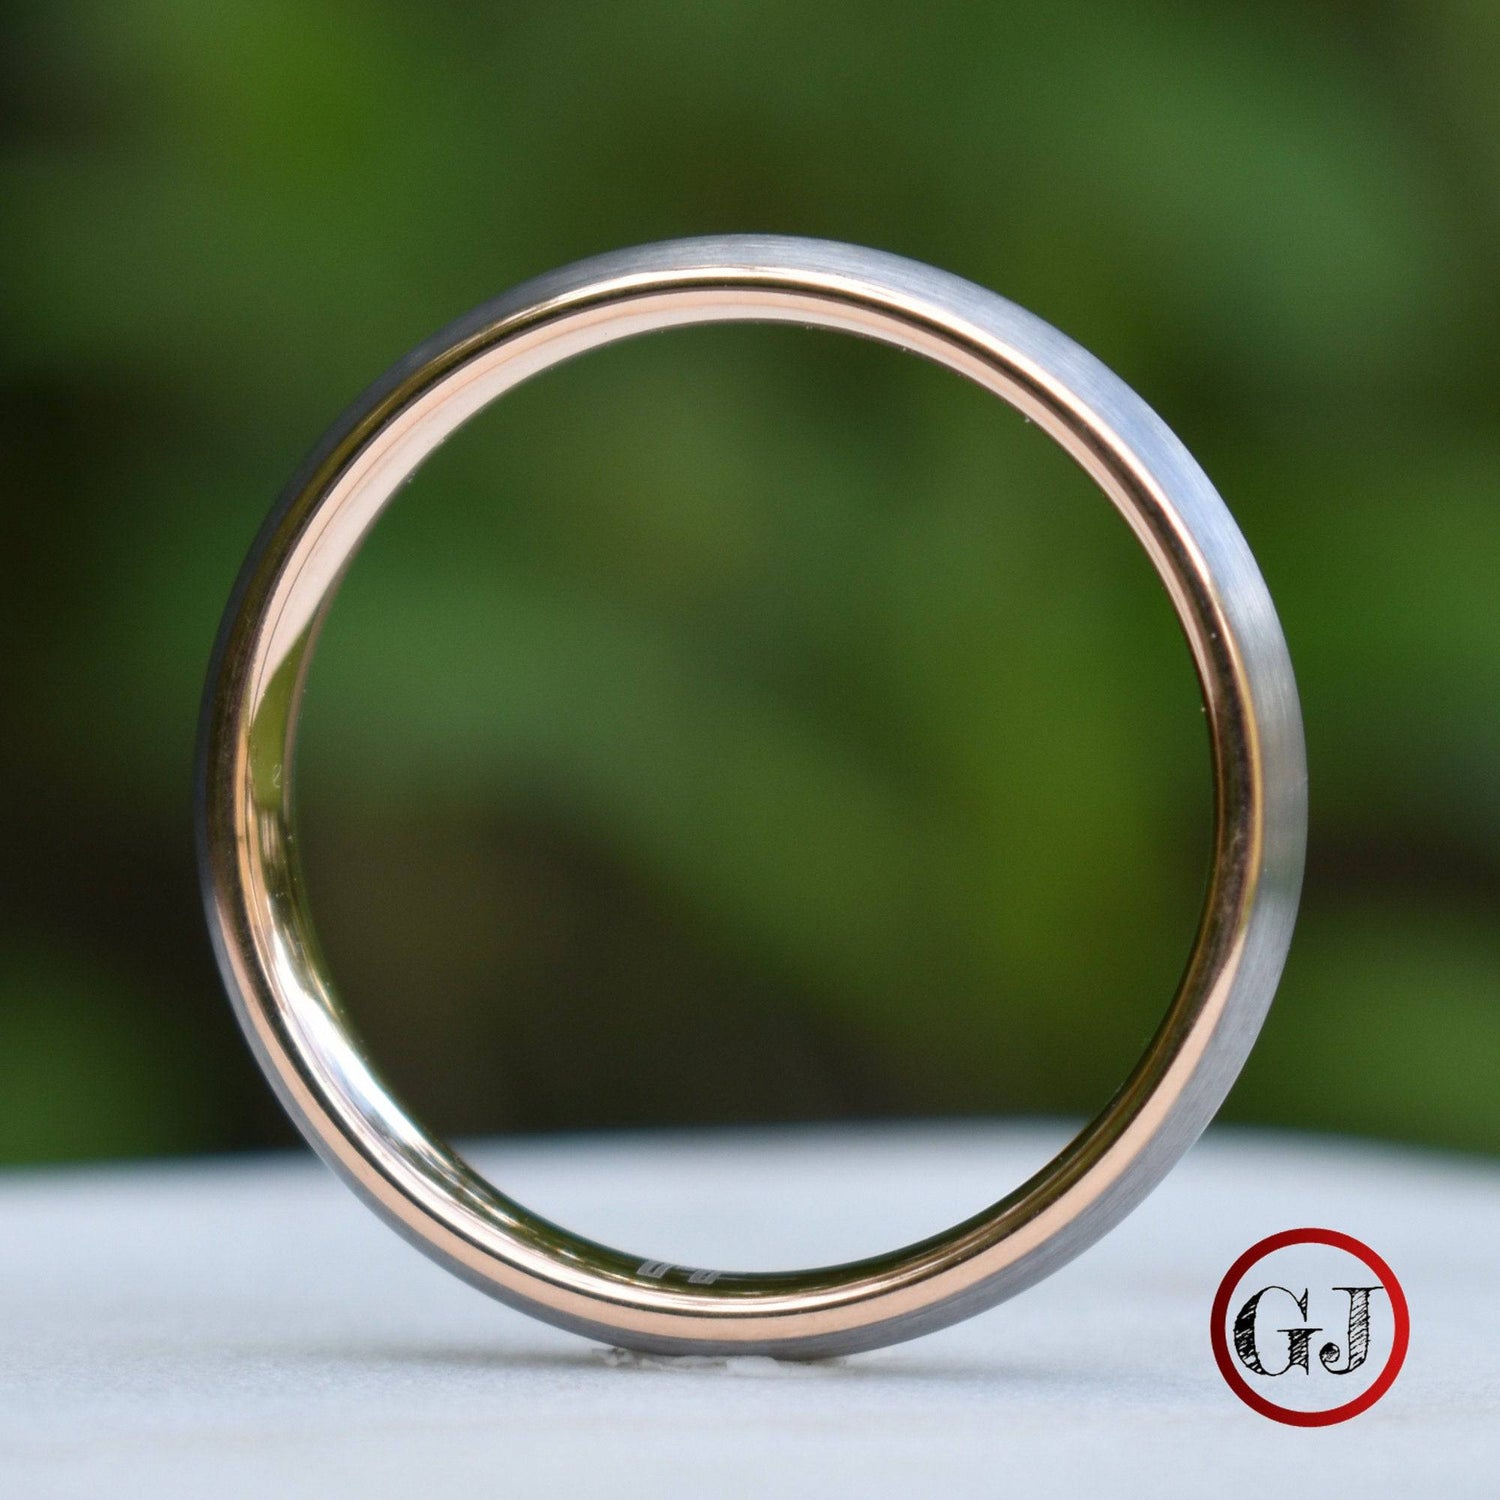 Tungsten Ring 4mm Brushed Silver with Rose Gold Comfort fit band - Tungsten Titans